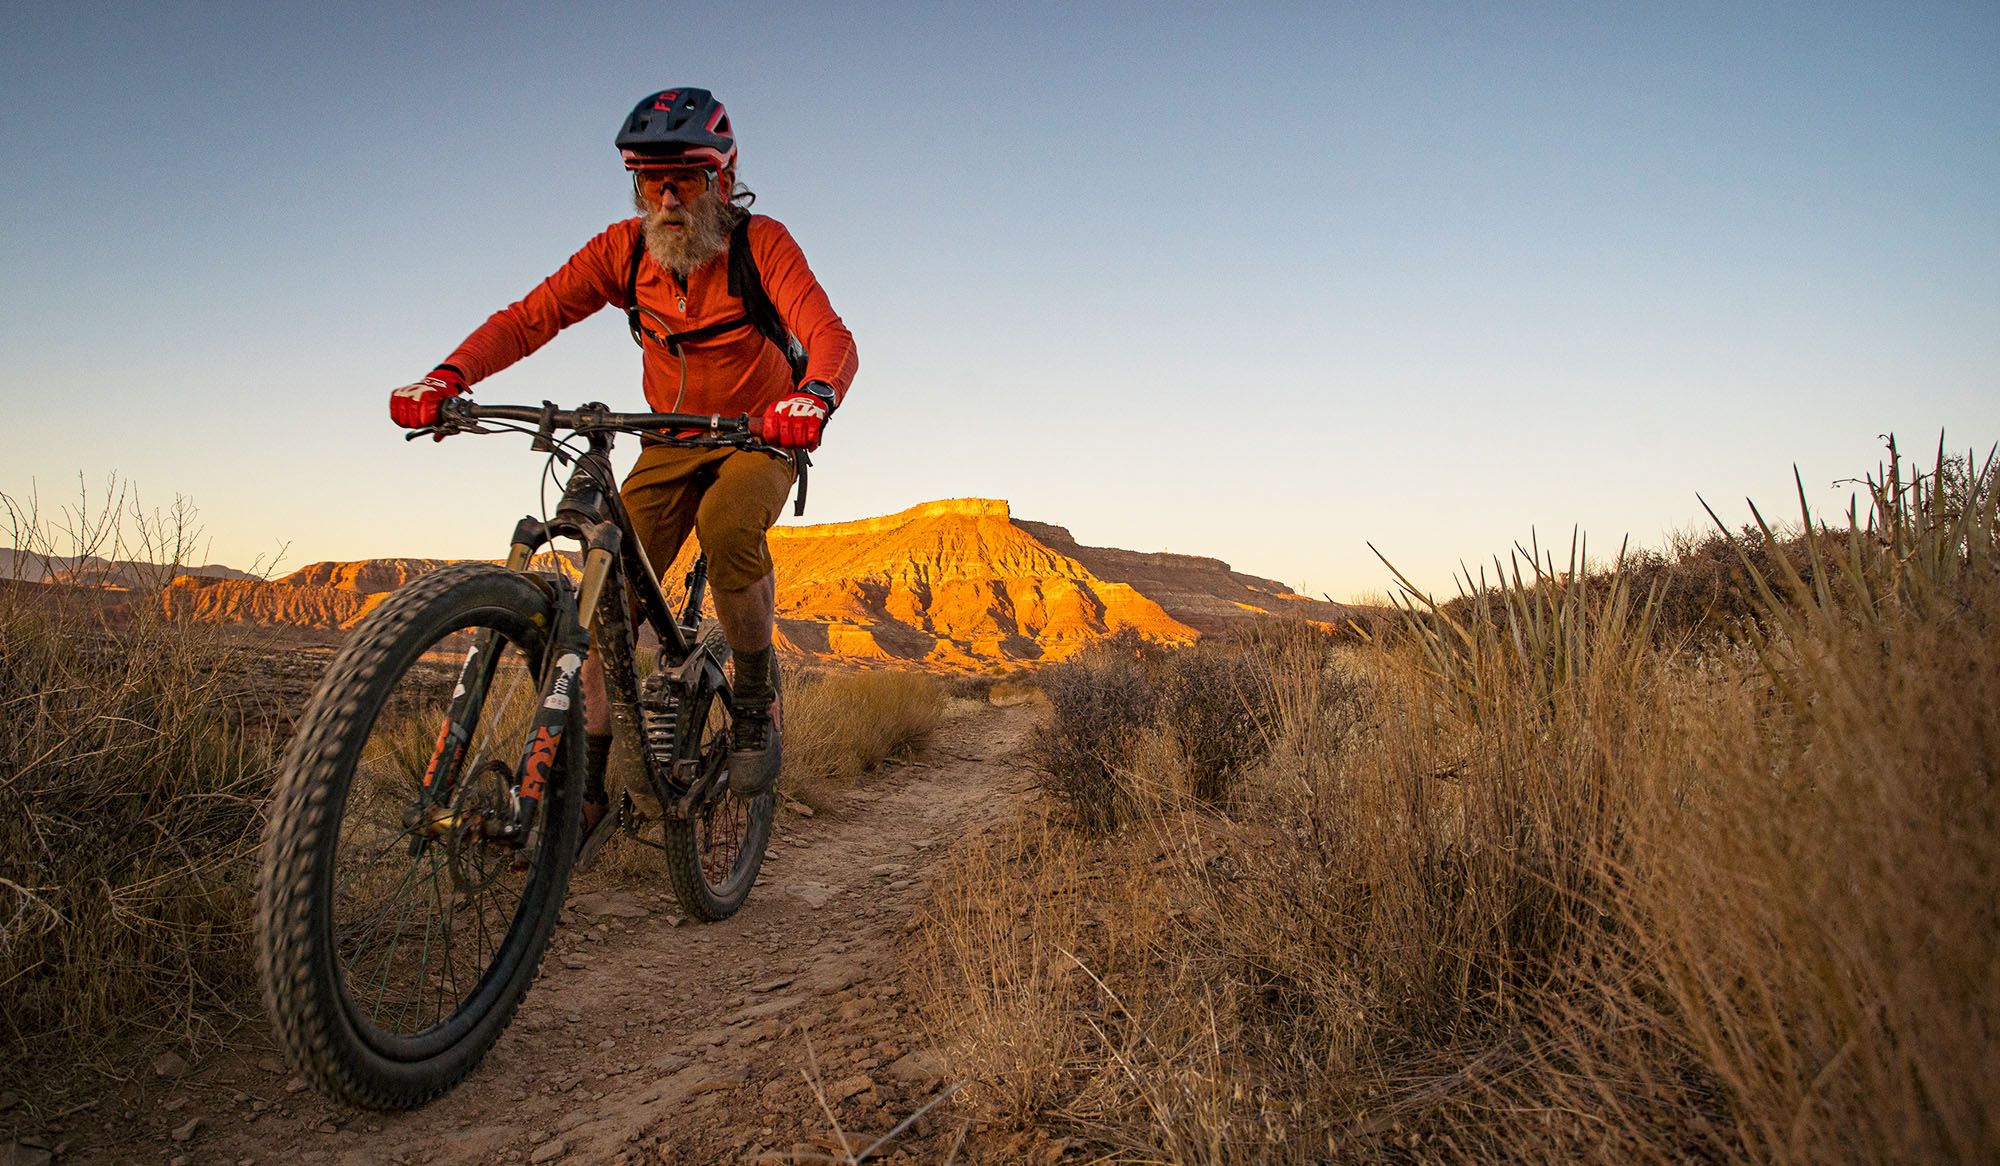 Meandering with purpose across the US, on his mountain bike, aged 71 | Psyche